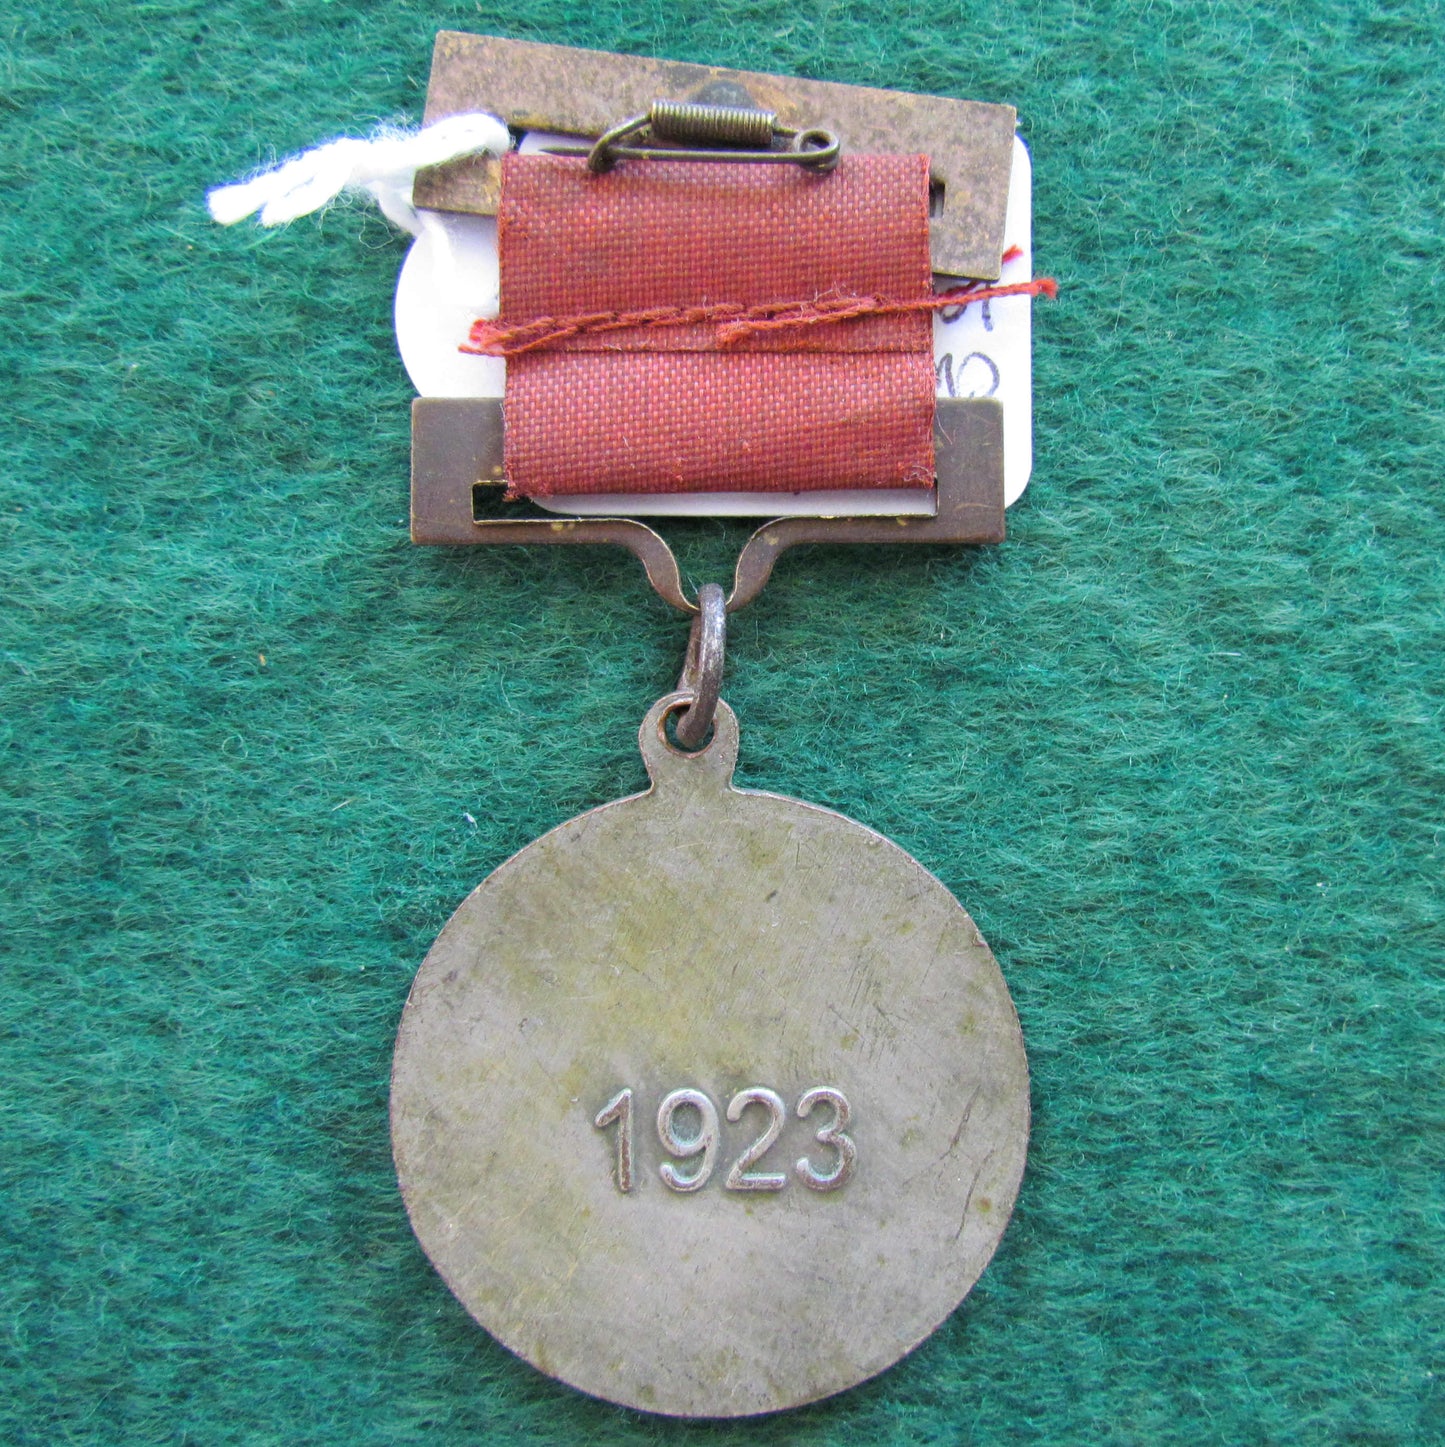 China Chinese Jiangan Jing-Han Railway Worker's Union Member's Badge Medal From 1923